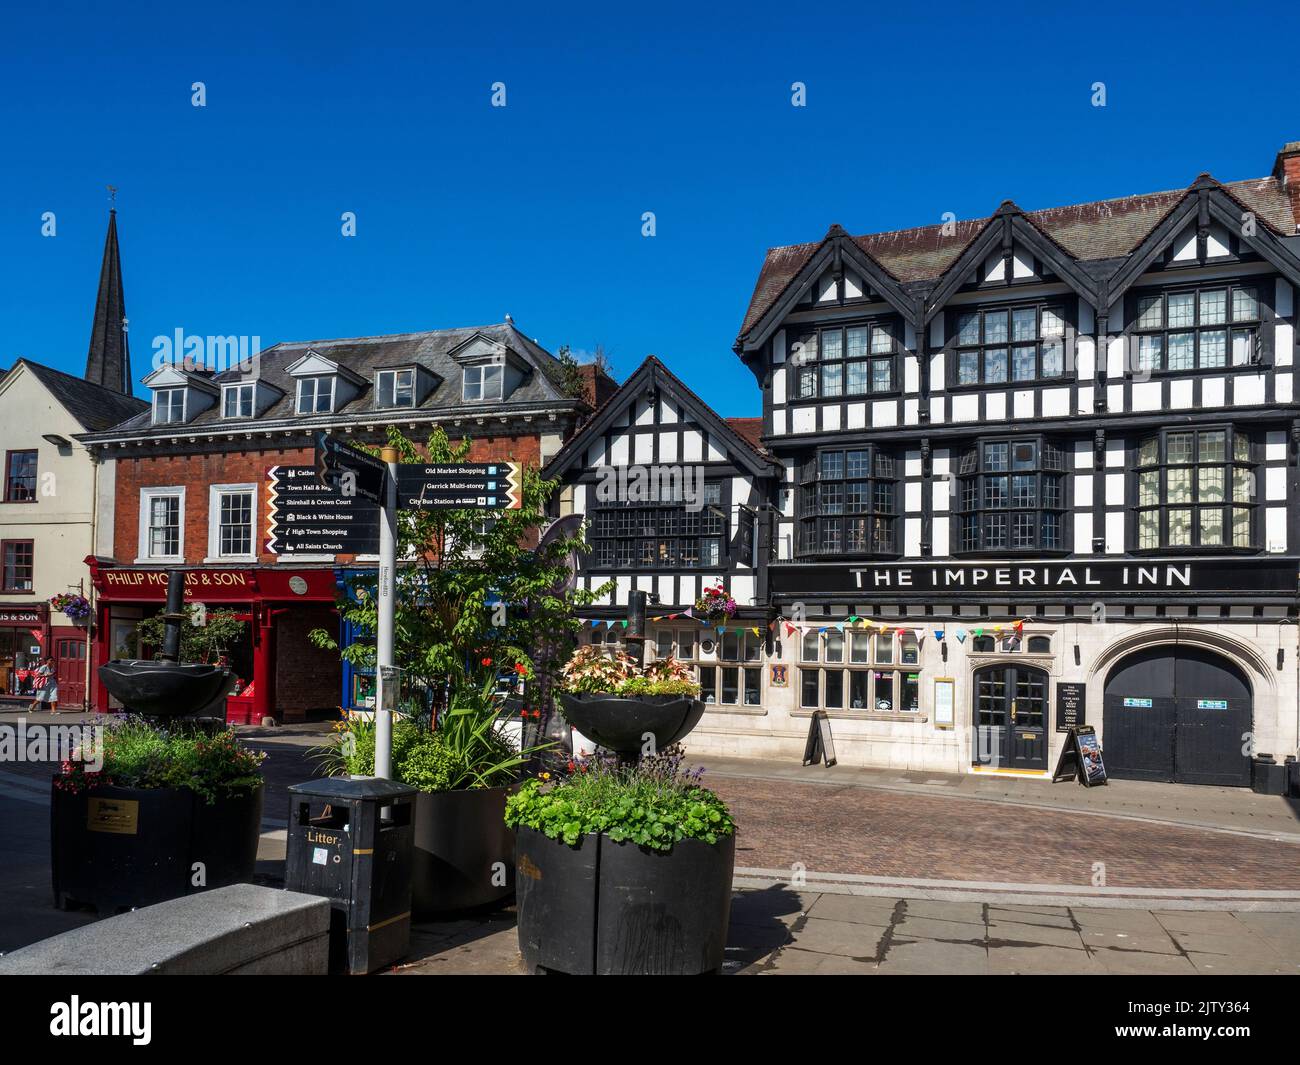 The Imperial Inn on  Widemarsh Street in Hereford Herefordshire England Stock Photo